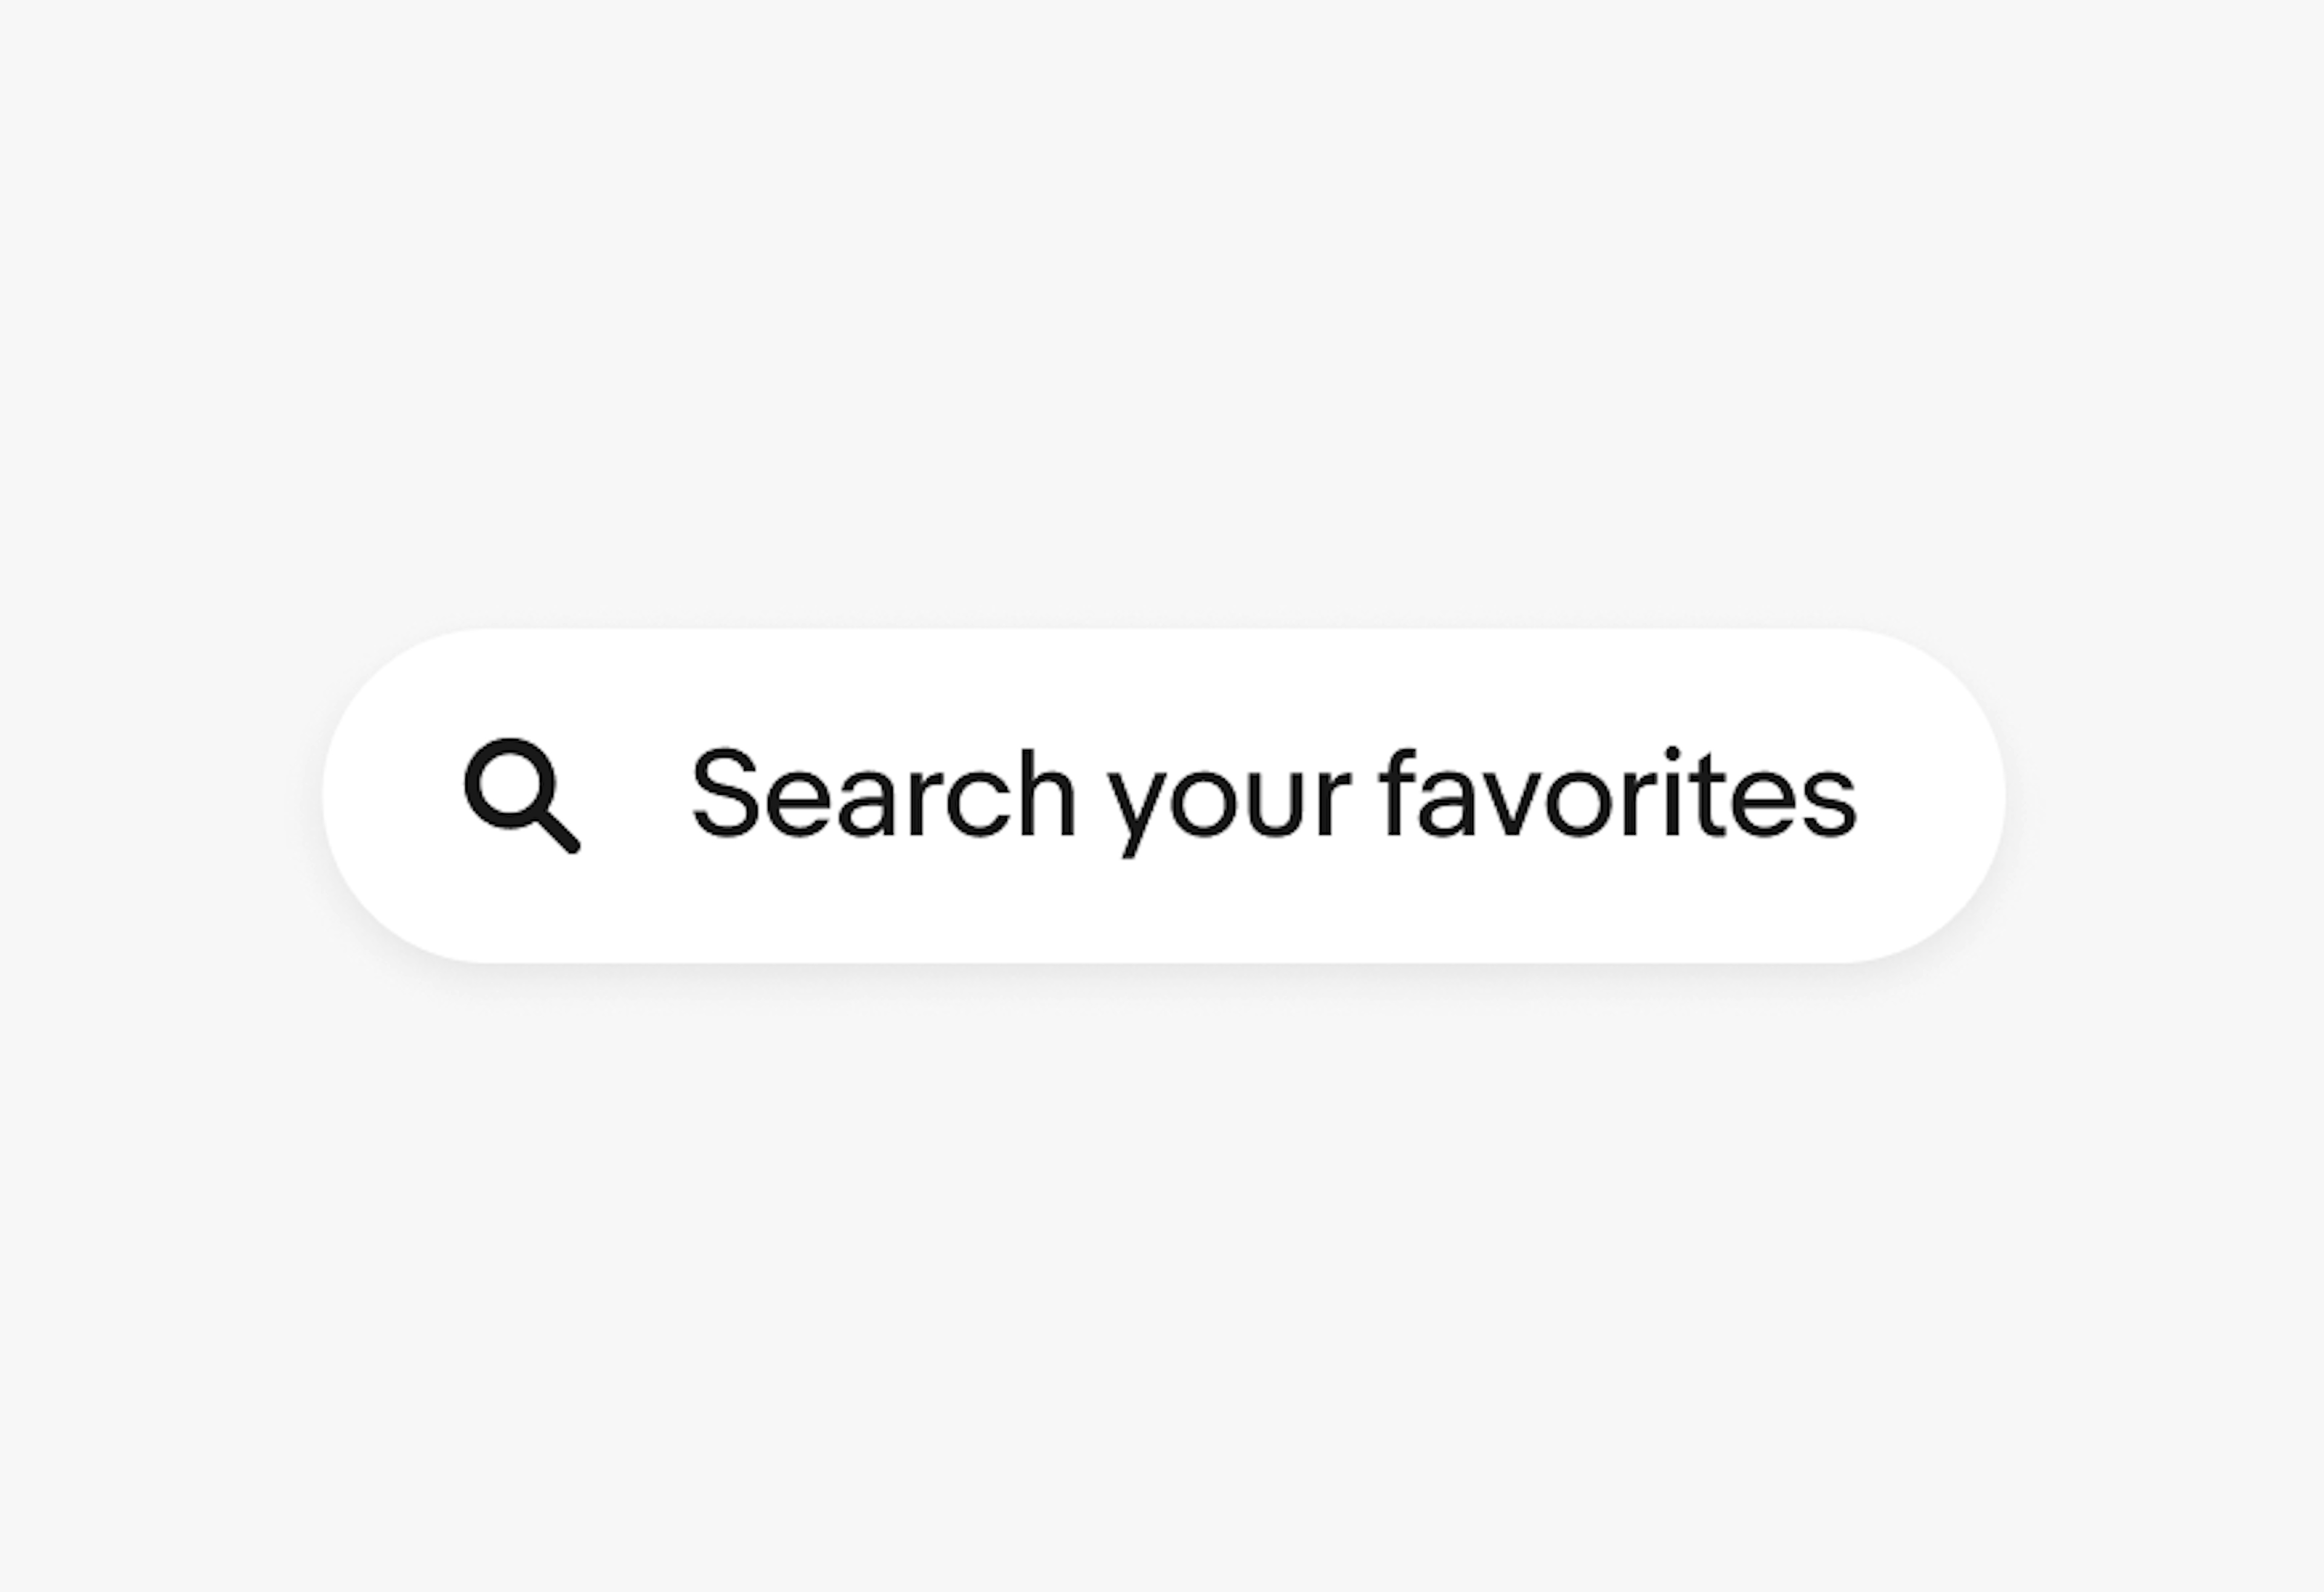 A search input with a search icon and placeholder text.